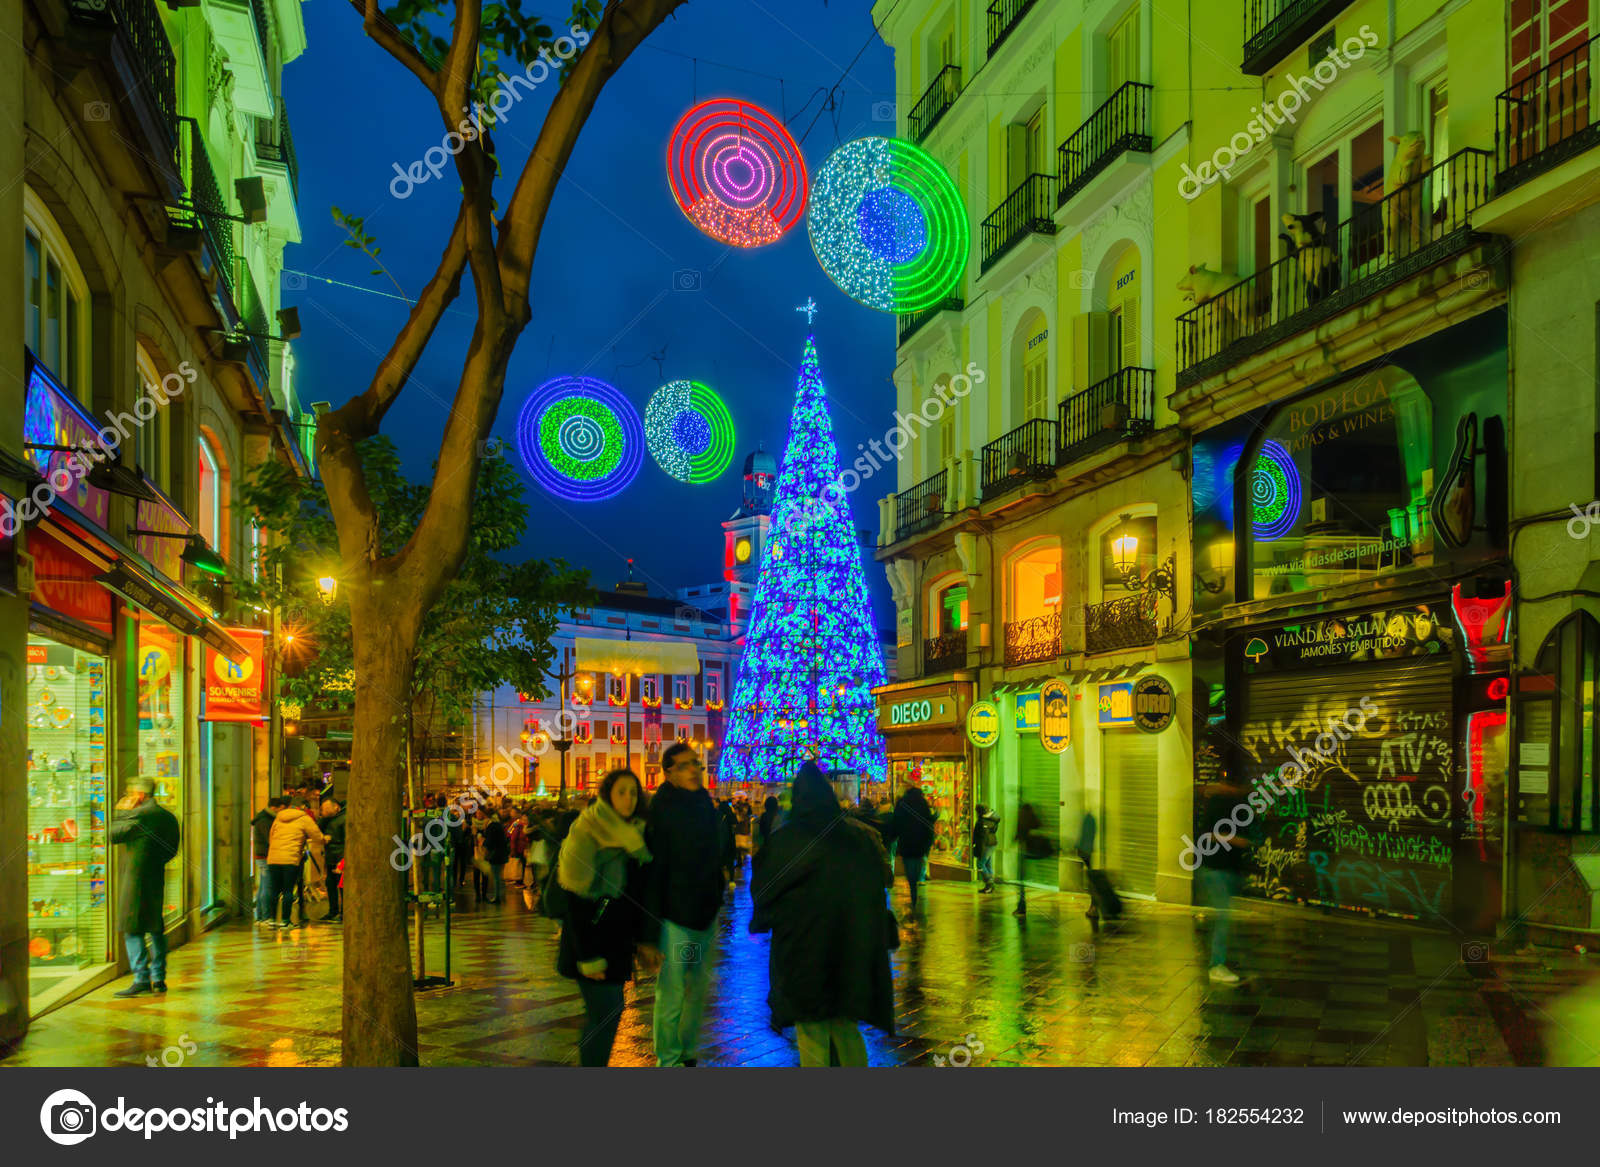 Natale A Madrid.Puerta Del Sol Square With A Christmas Tree In Madrid Stock Editorial Photo C Rndms 182554232